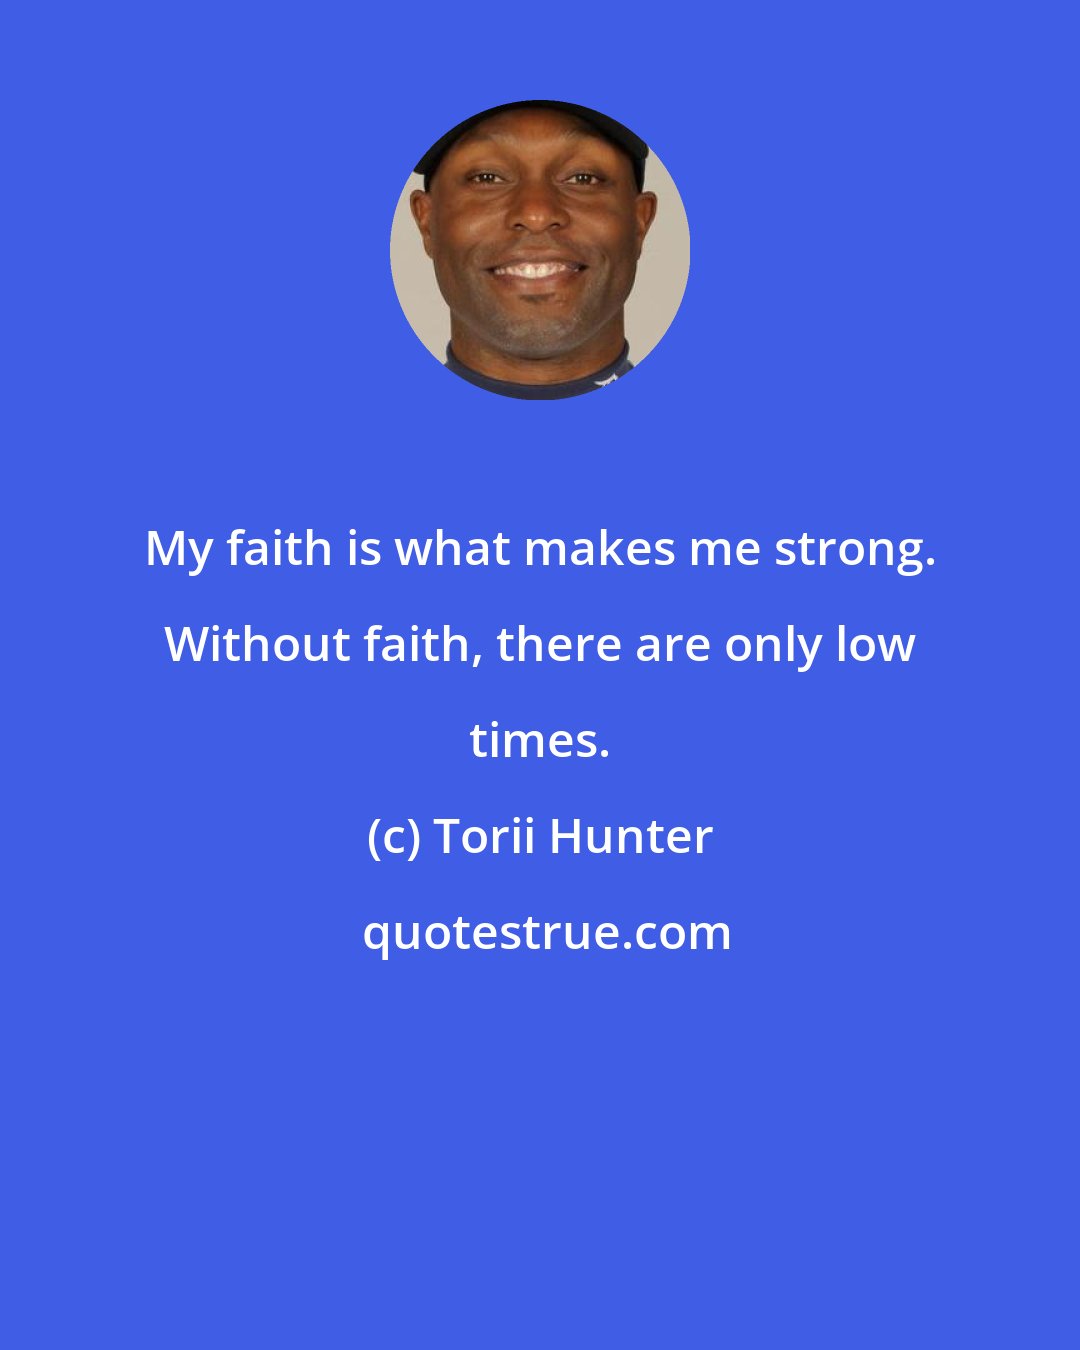 Torii Hunter: My faith is what makes me strong. Without faith, there are only low times.